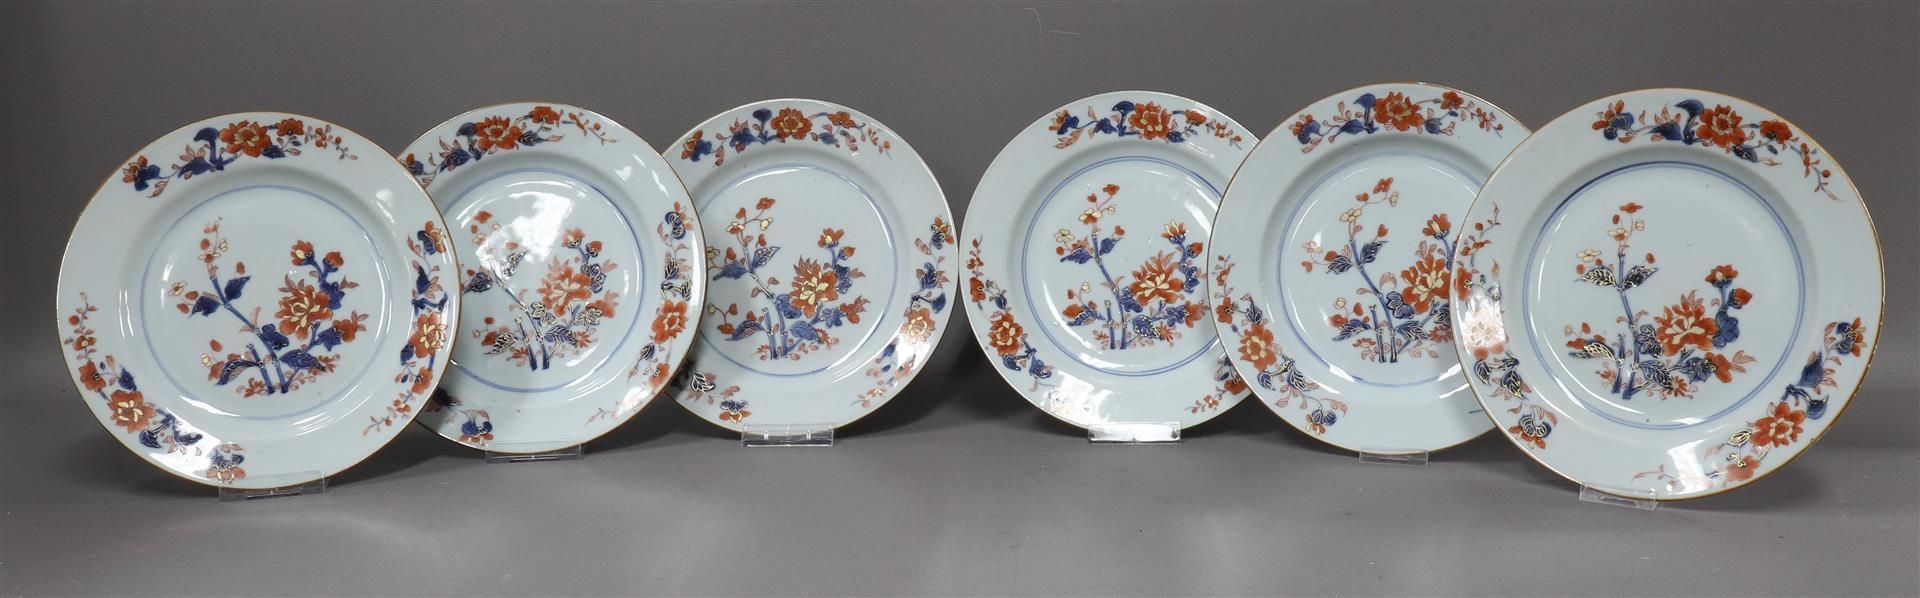 A series of six porcelain Chinese Imari plates, China, Qianlong 18th century. Blue, red, partly gold